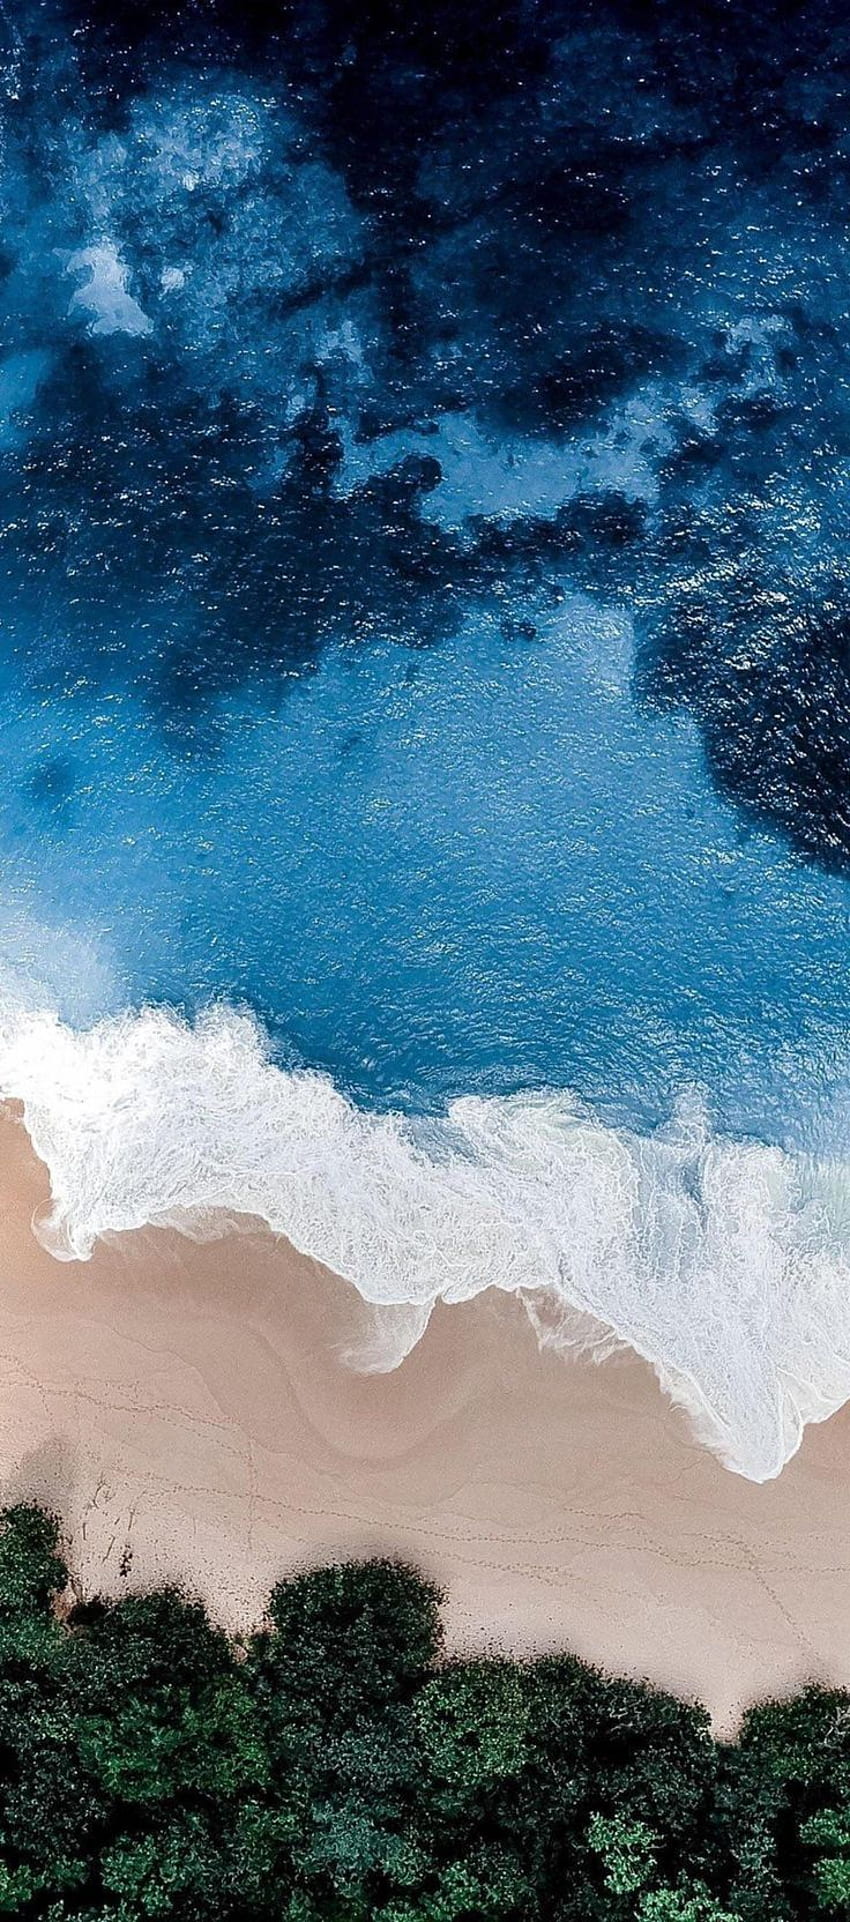 Aqua blue sea water, texture natural light and waves - a Royalty Free Stock  Photo from Photocase